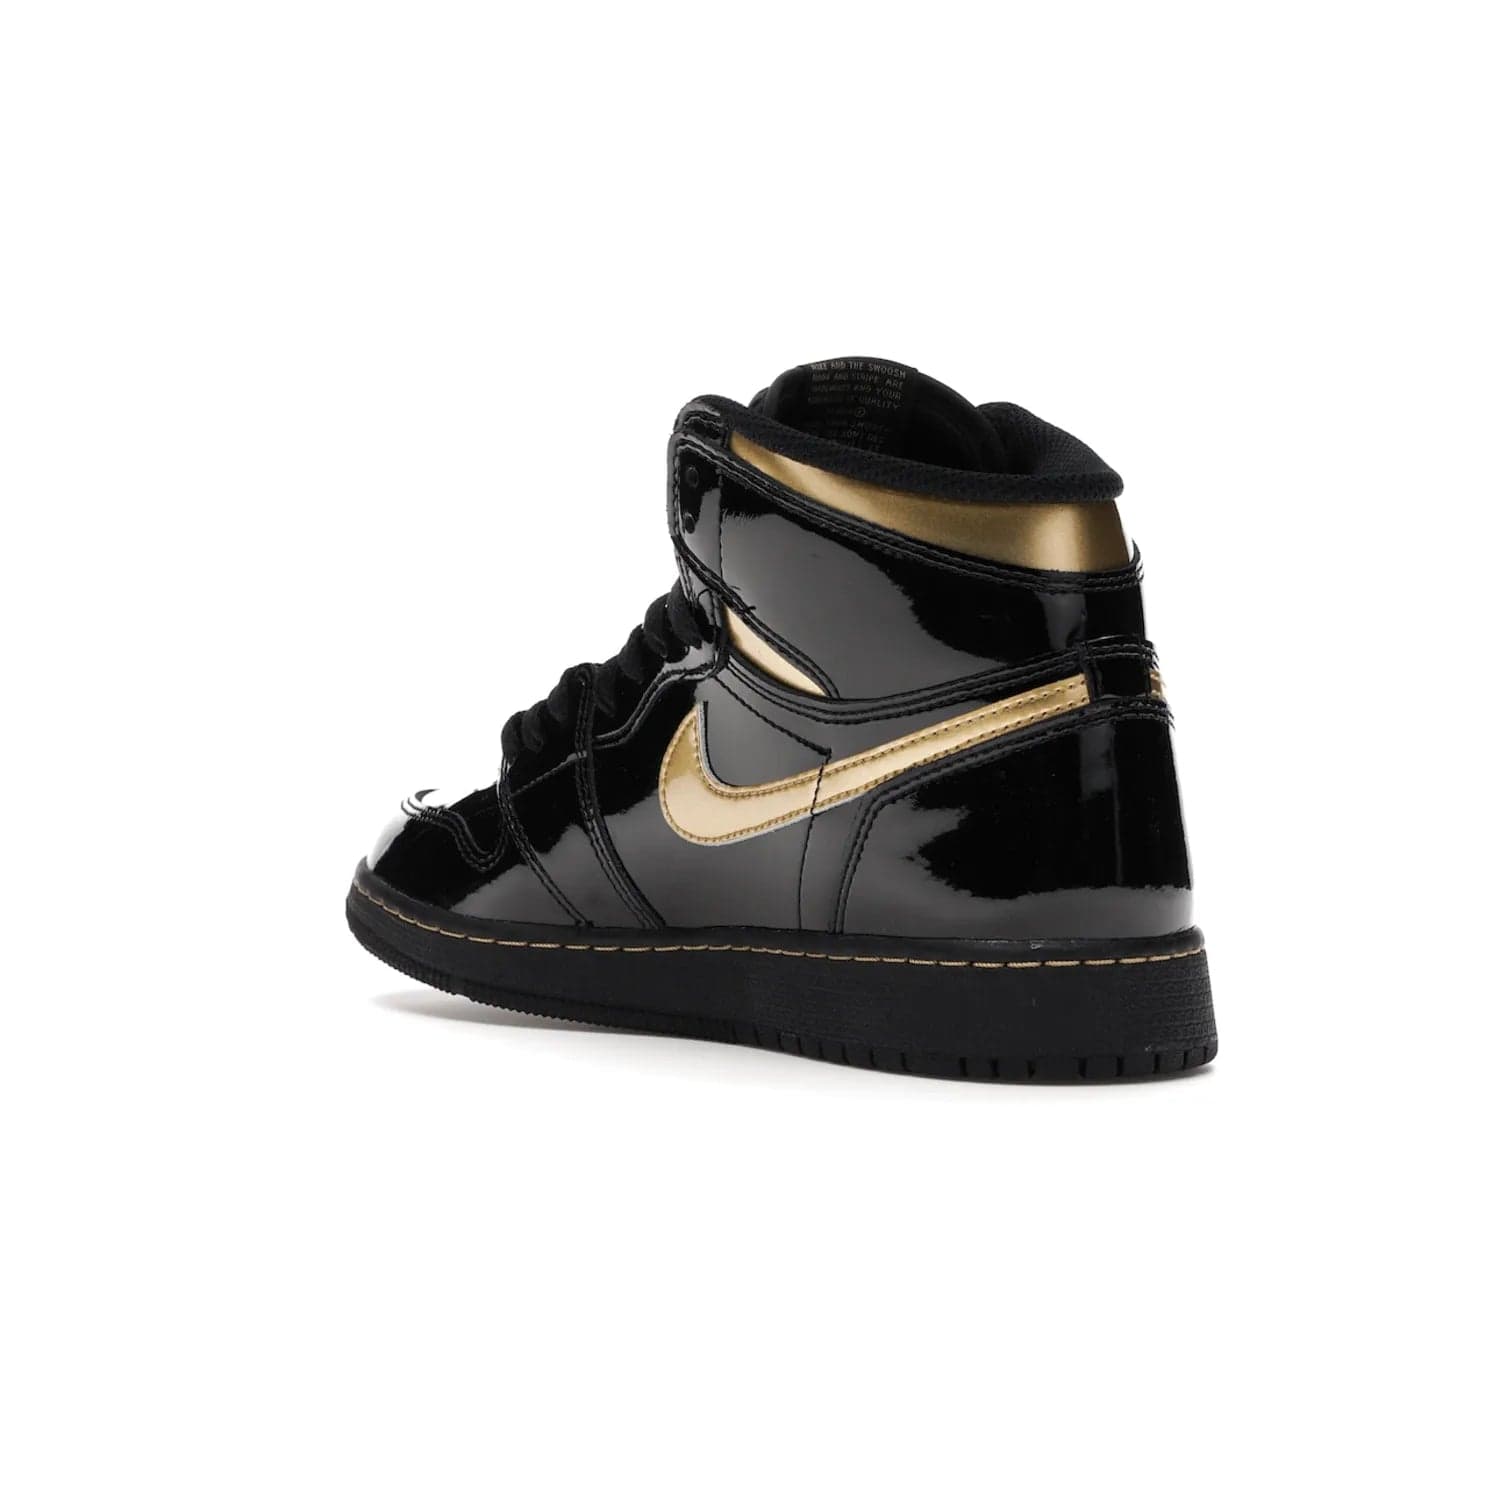 Jordan 1 Retro High Black Metallic Gold (2020) (GS) - Image 24 - Only at www.BallersClubKickz.com - Shop the Kids Air Jordan 1 Retro High in Black Metallic Gold for a stylish and comfortable sneaker kids can love. Featuring black and metallic gold patent leather uppers, metallic gold accents, and an Air sole unit for extra cushioning.